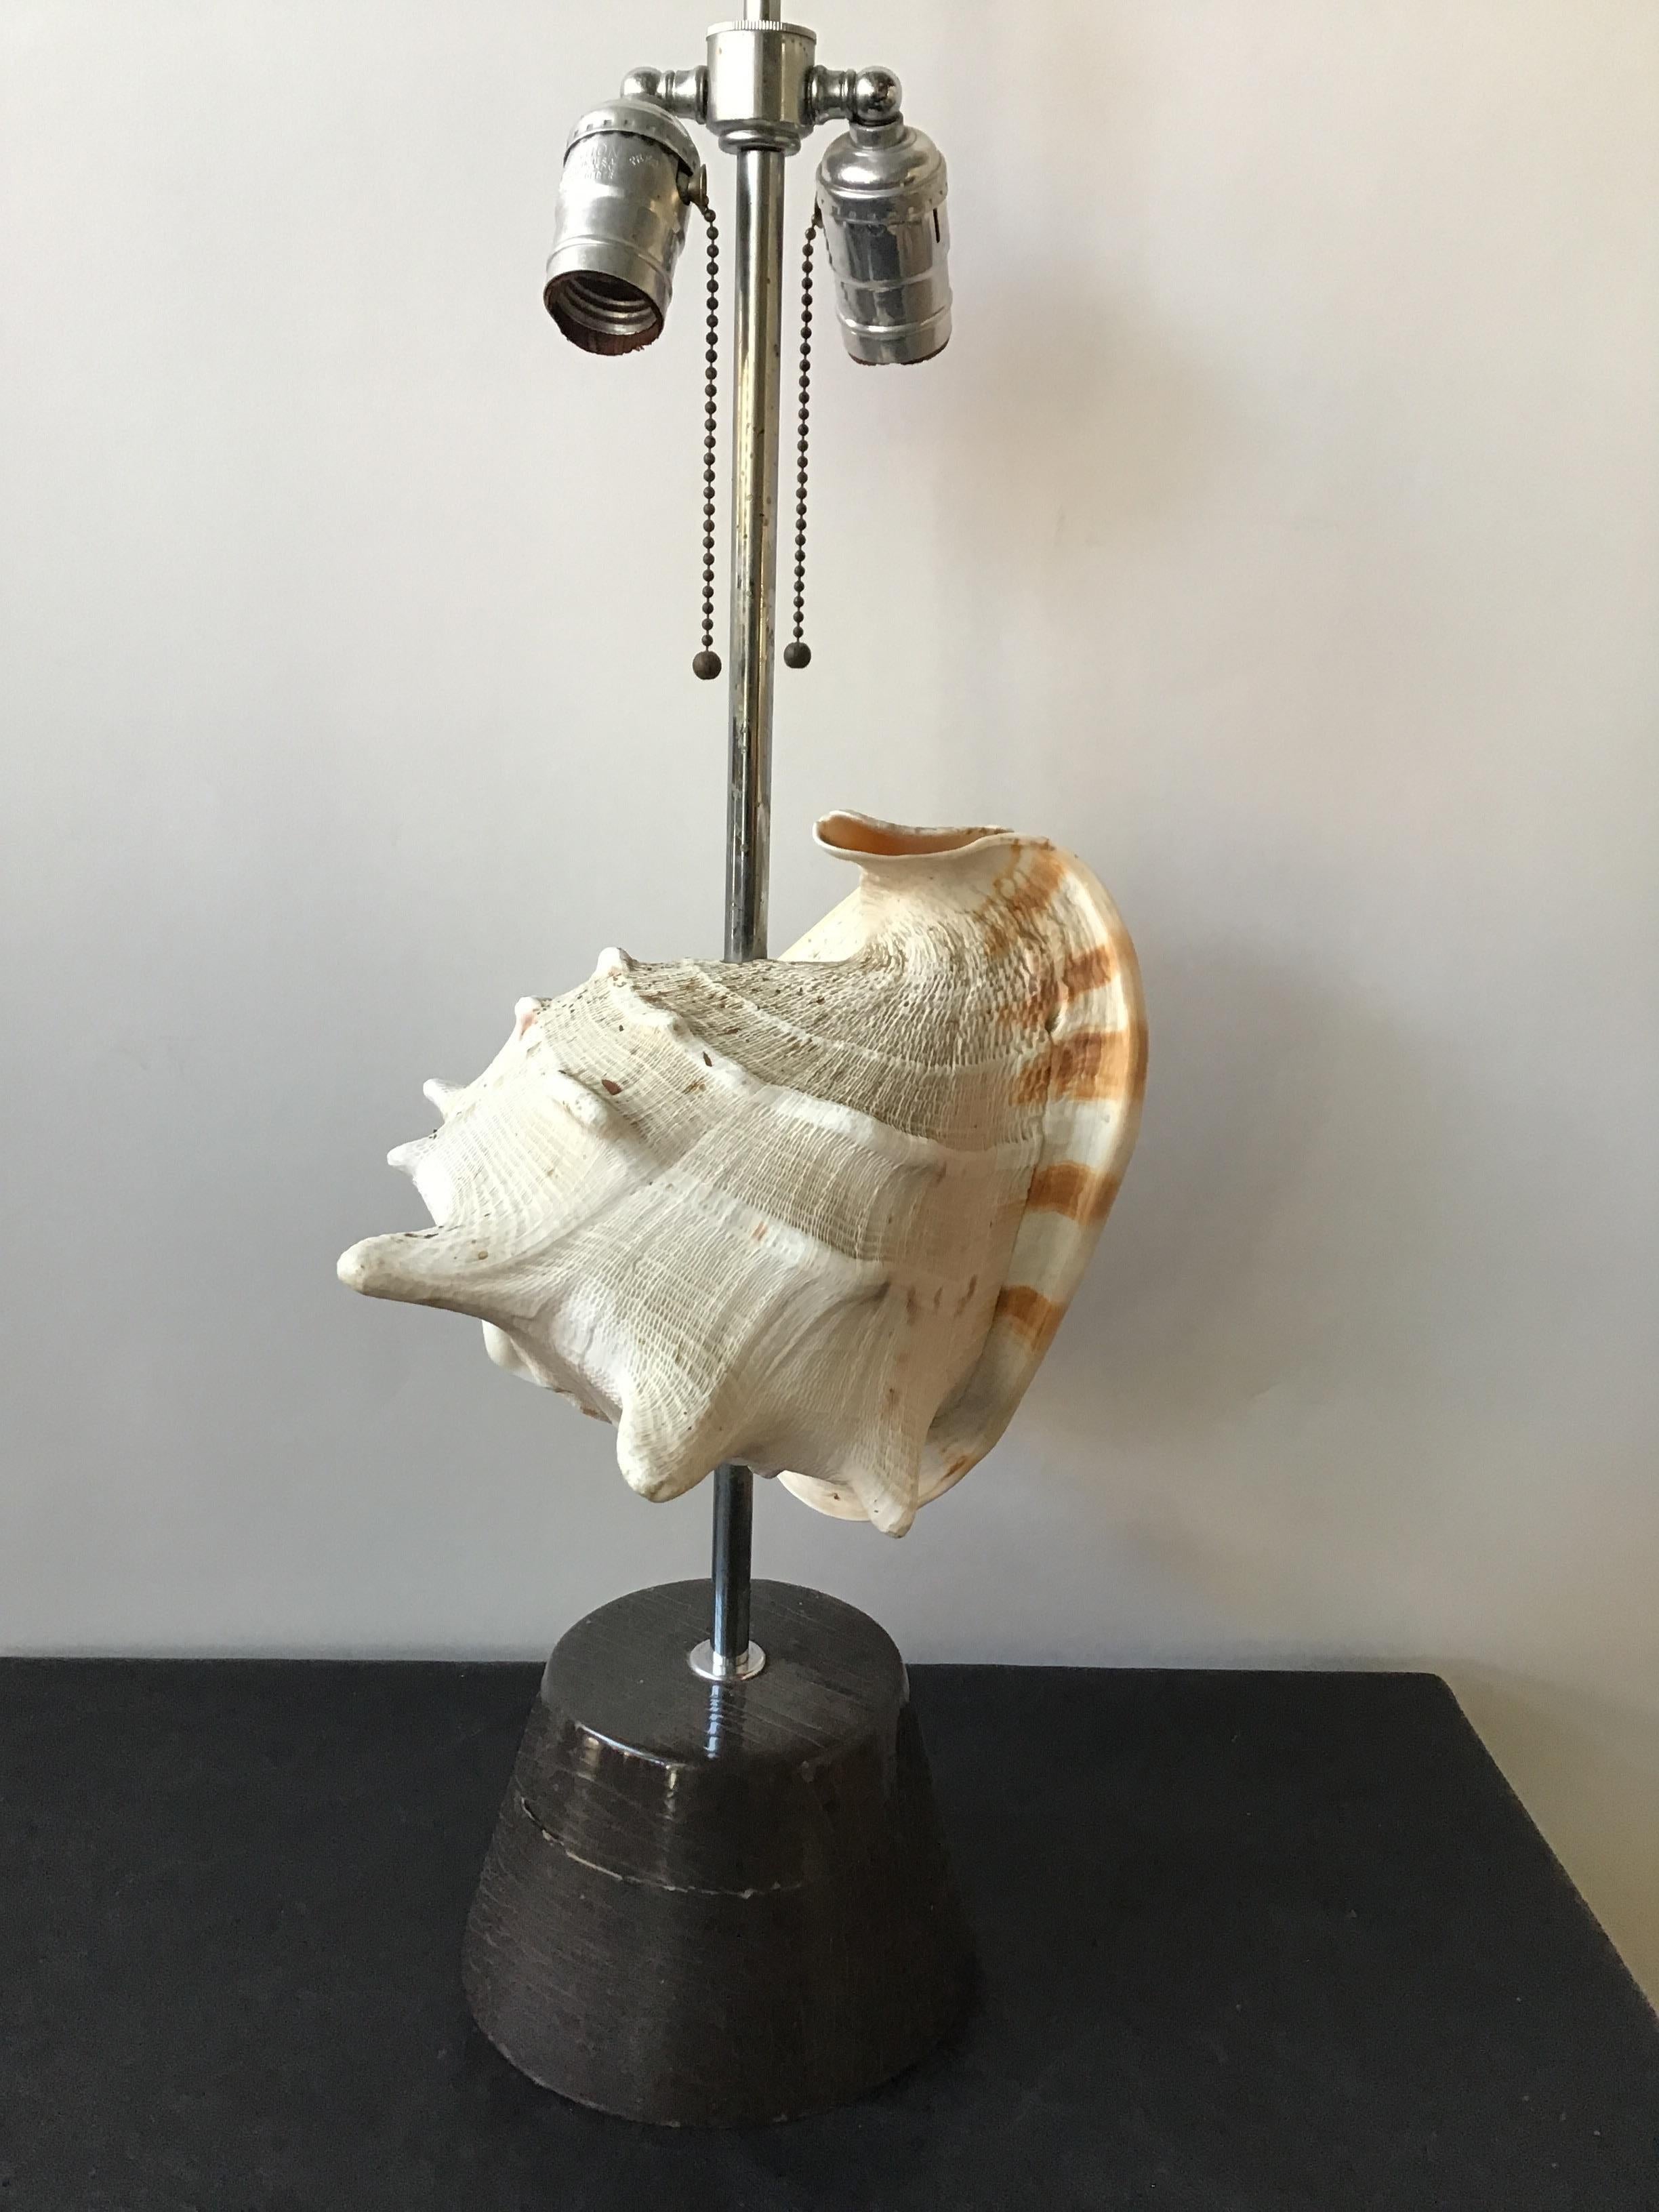 1950s conk shell lamp. She’ll spins so can be shown in any position. Wood base.